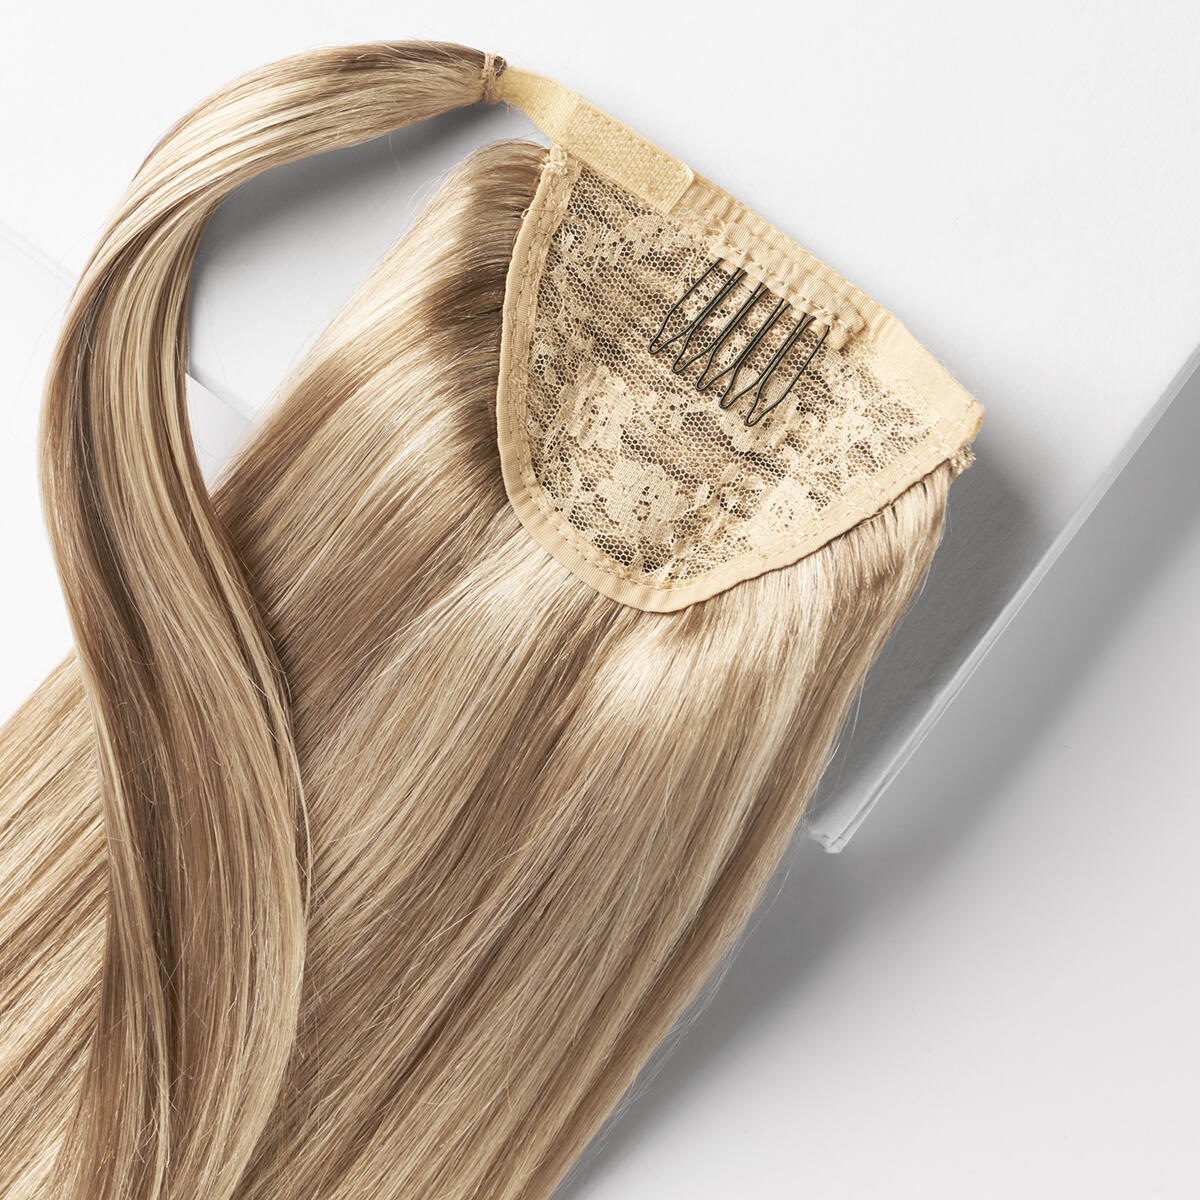 Clip-in Ponytail Ponytail made of real hair M7.1/10.8 Natural Ash Blonde Mix 40 cm